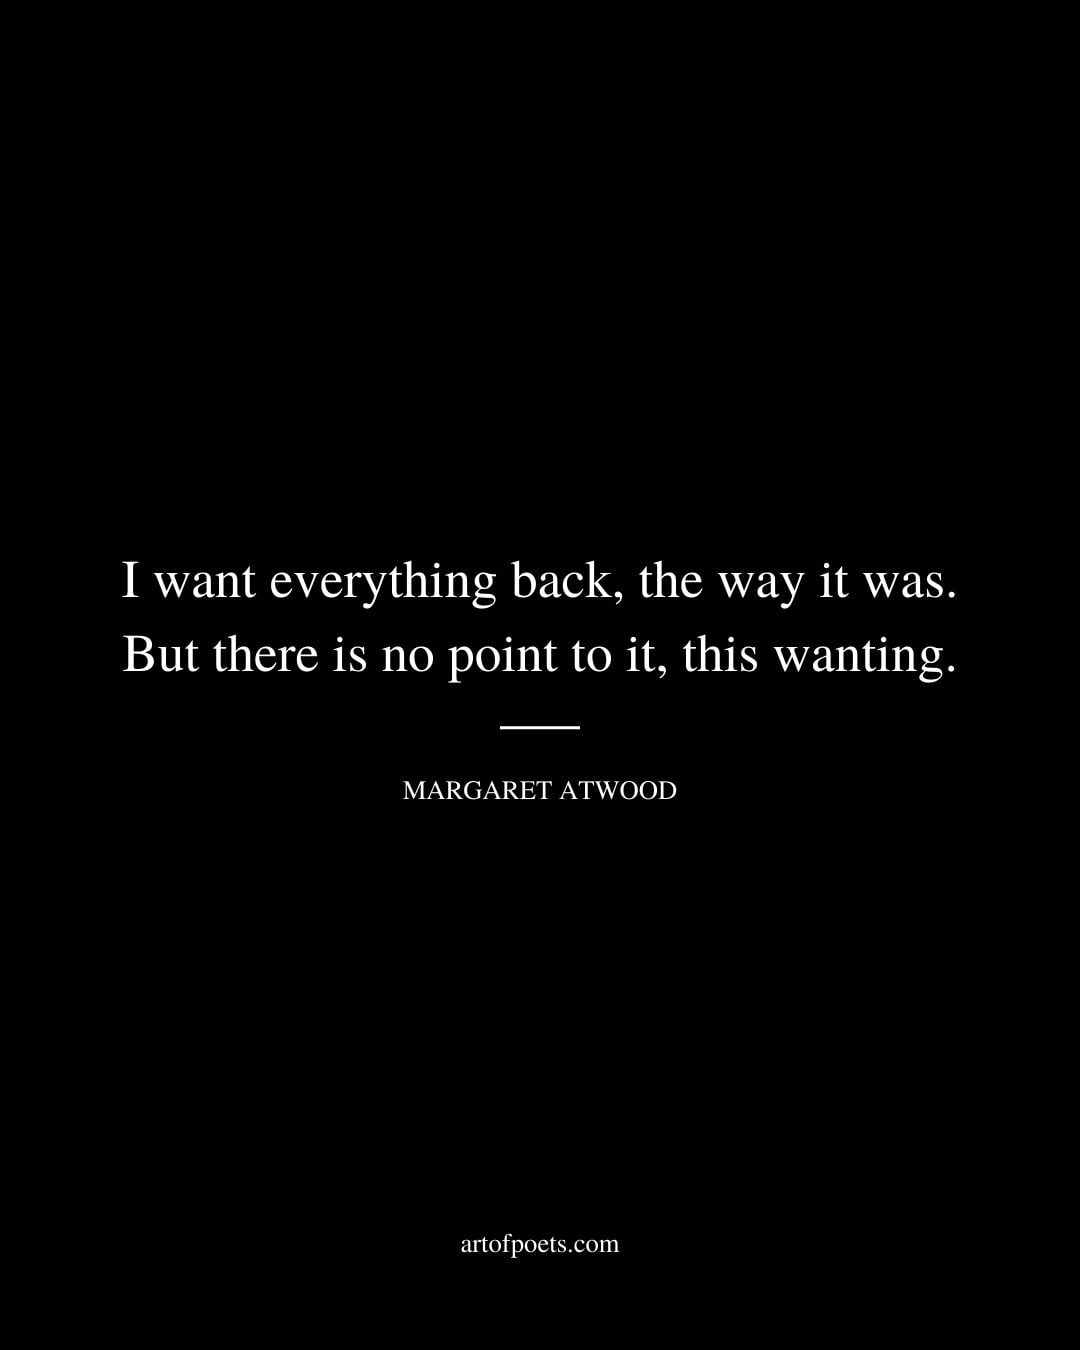 I want everything back the way it was. But there is no point to it this wanting. Margaret Atwood